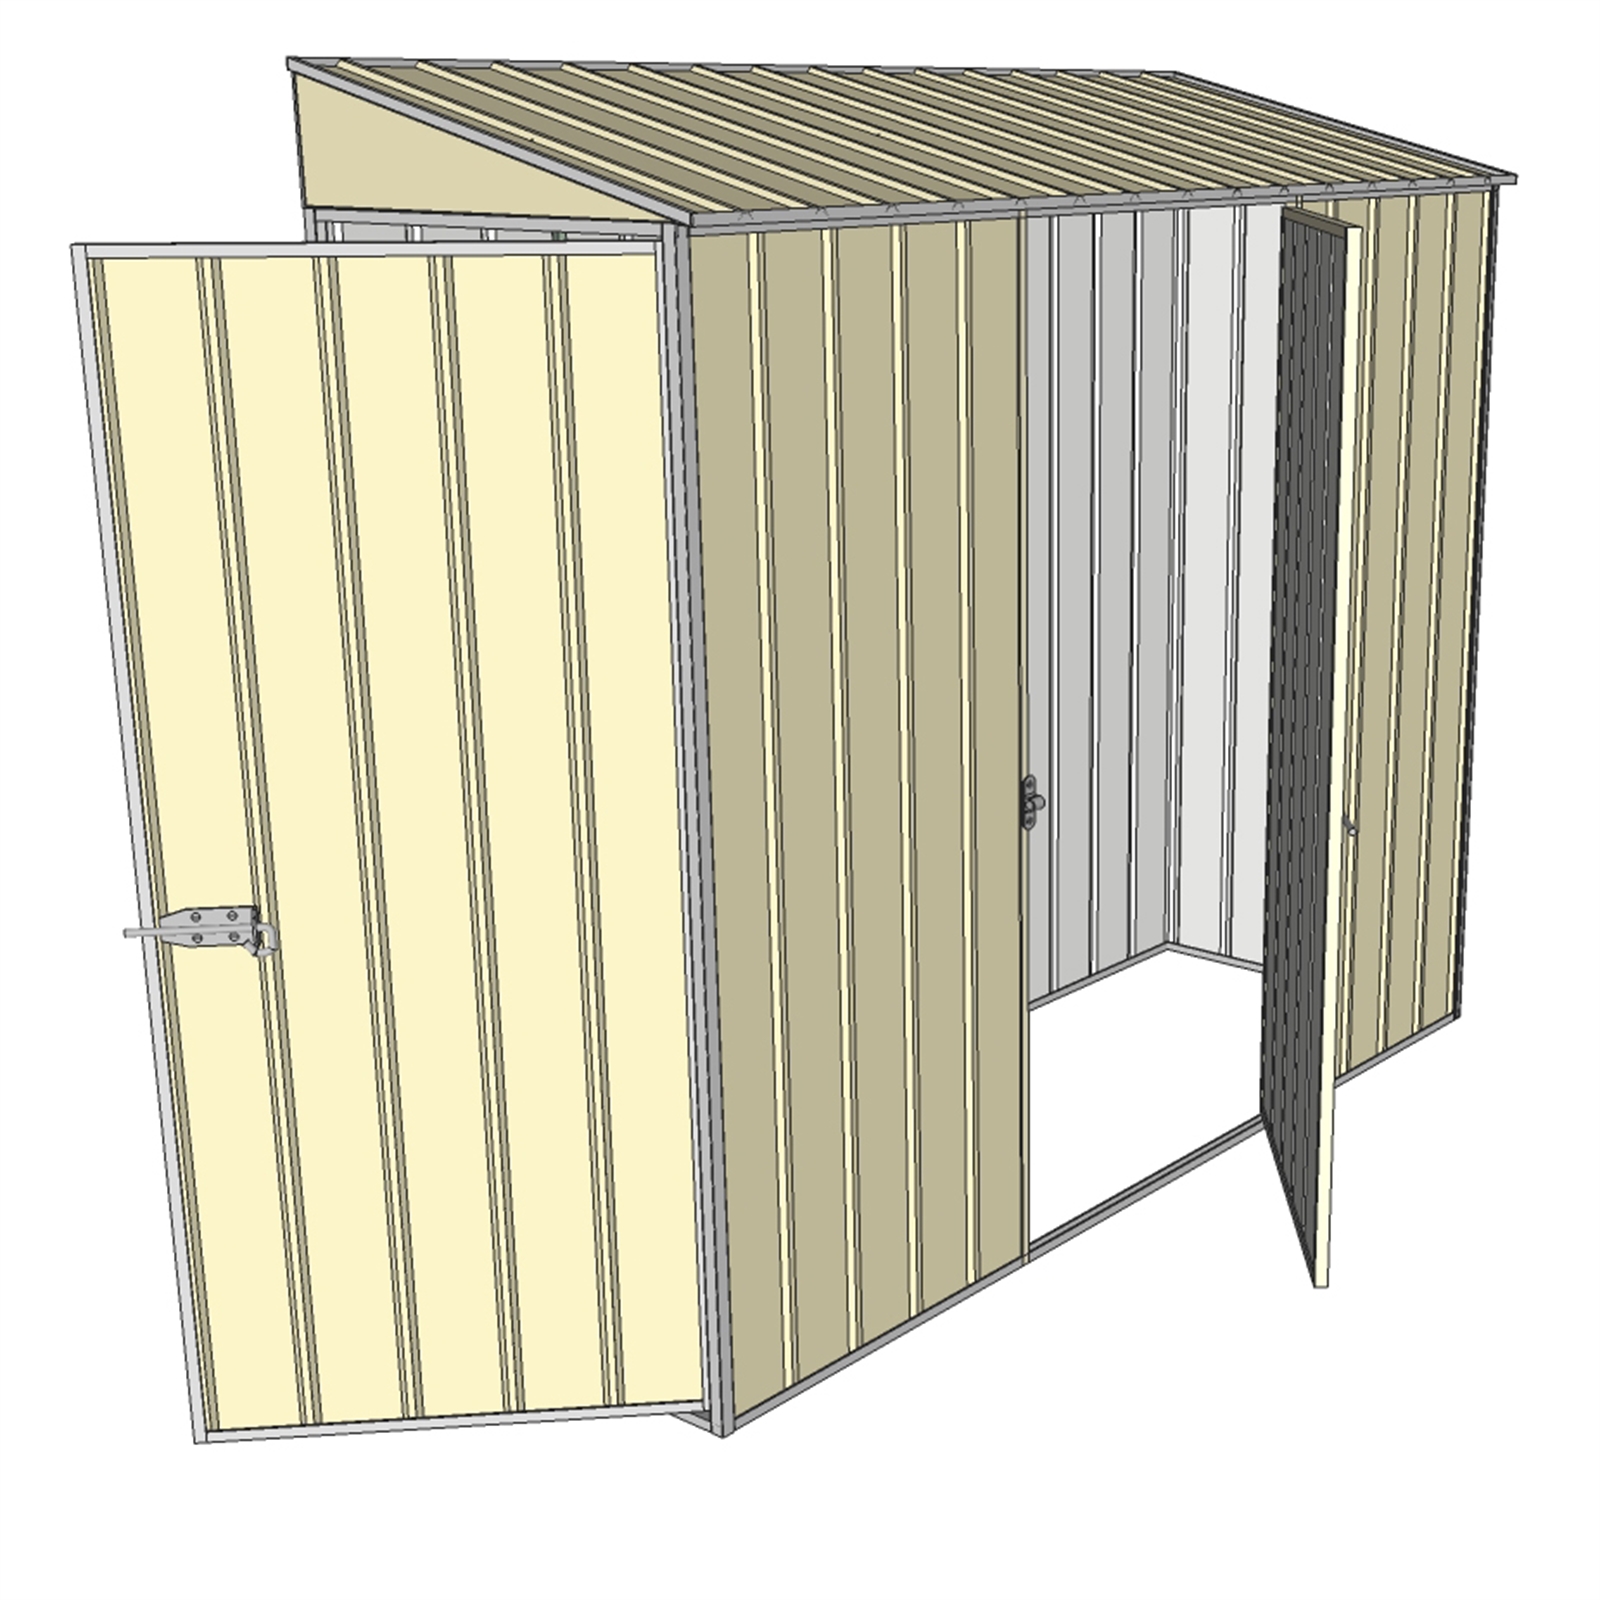 Build-a-Shed 2.3 x 0.8m Cream Skillion Two Single Hinged Doors Narrow Shed